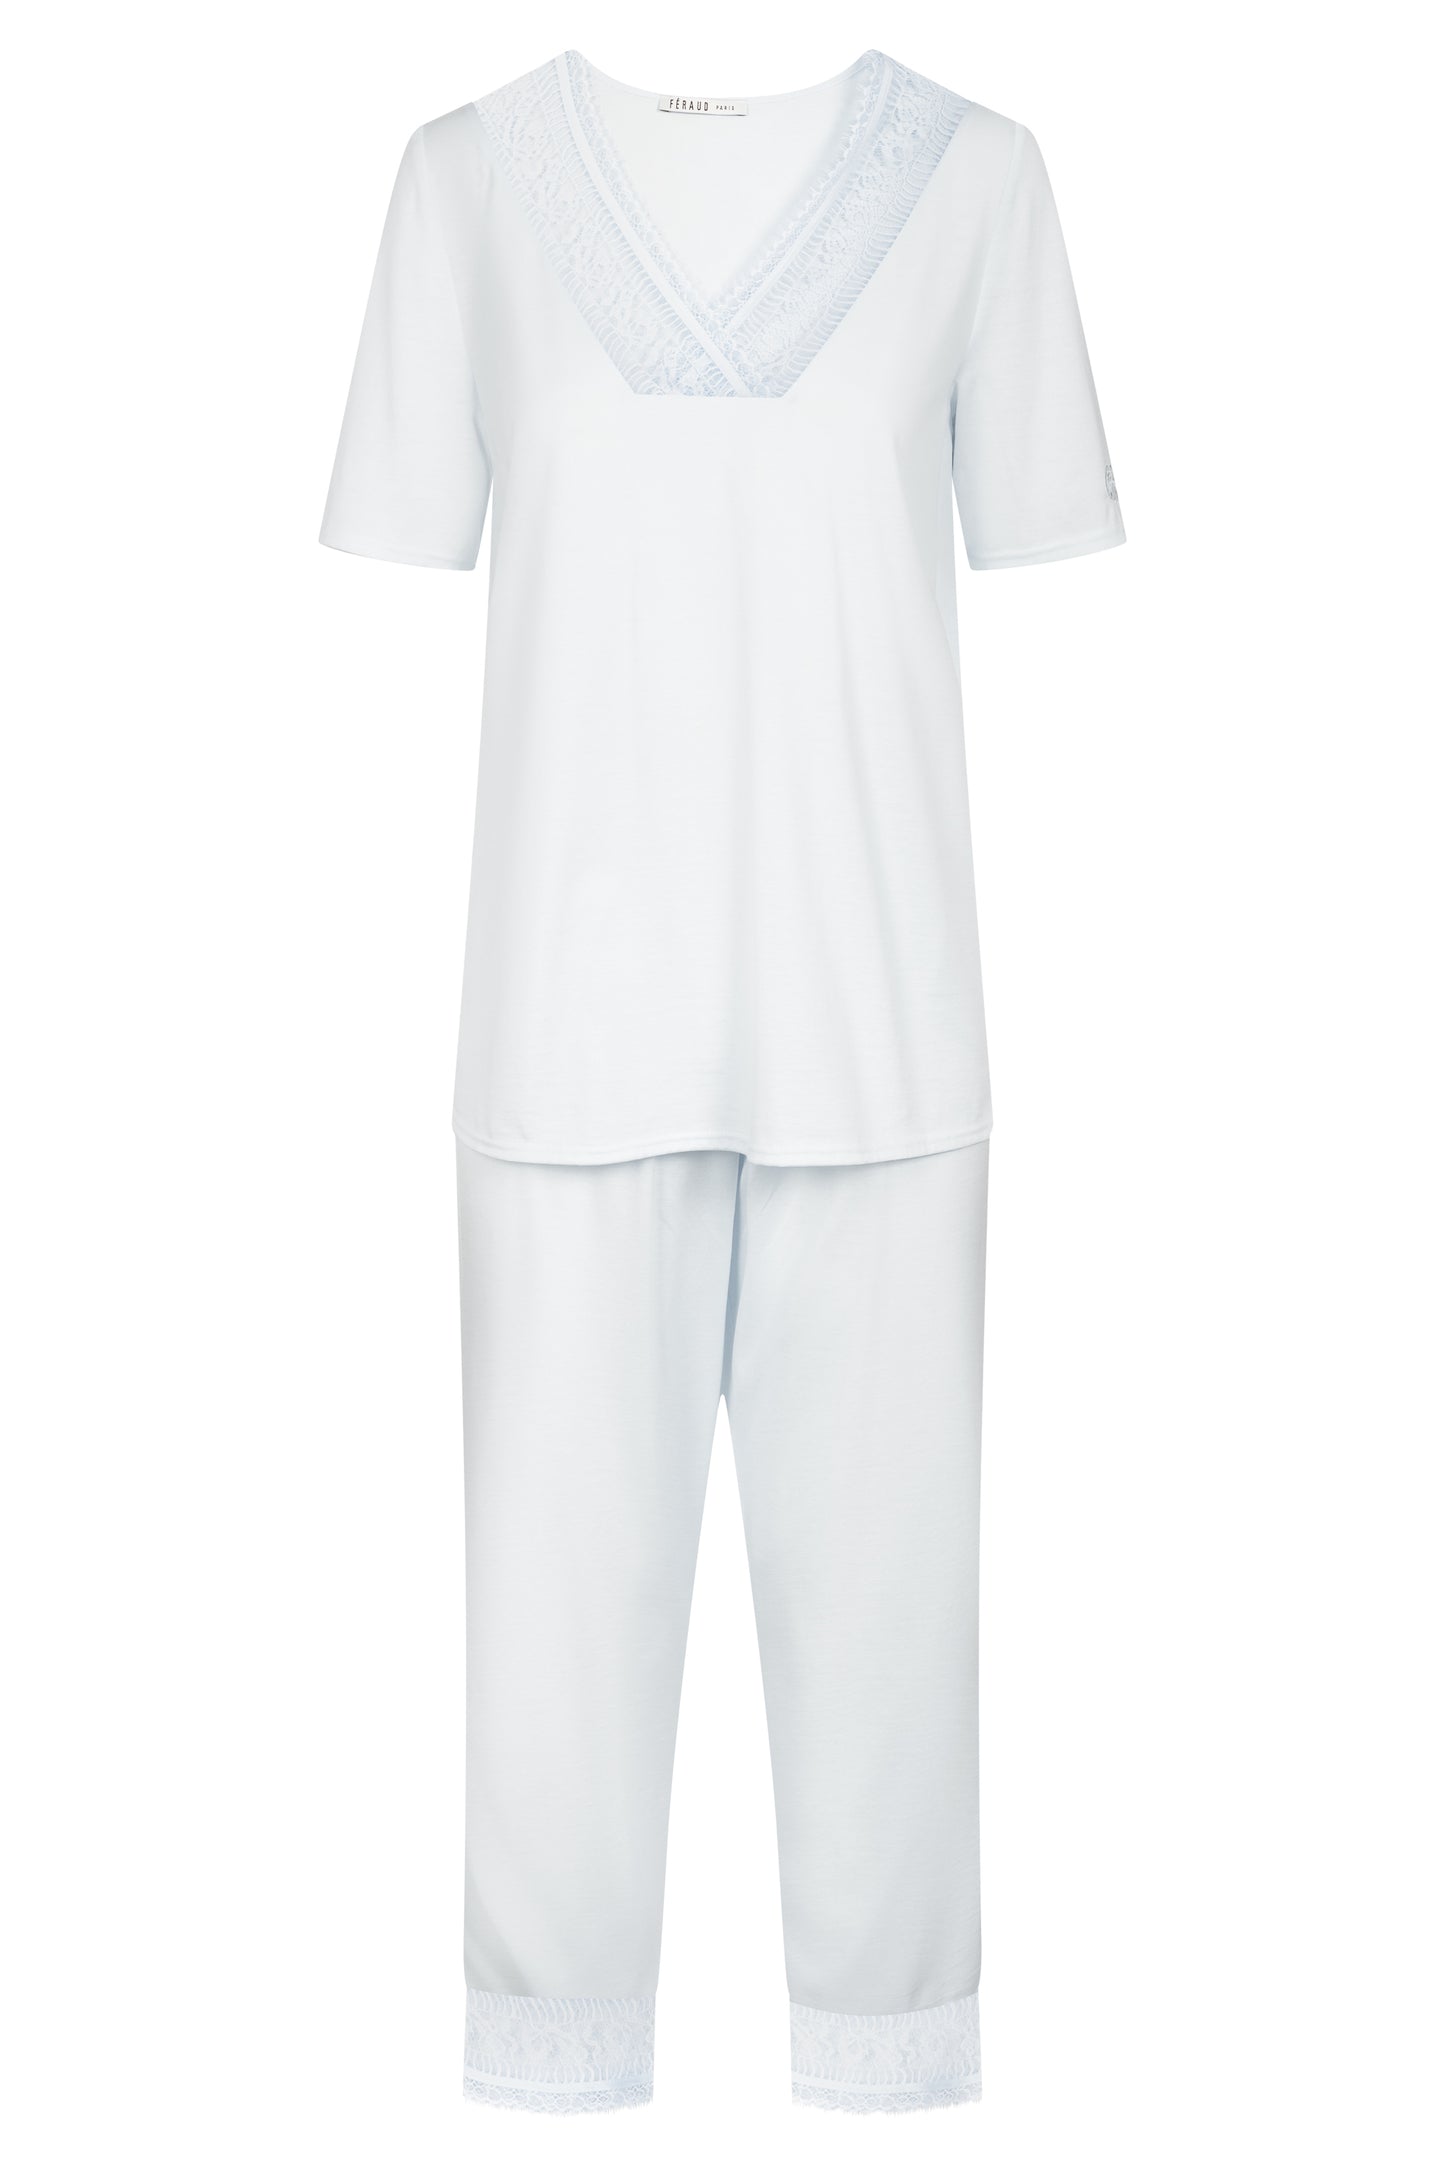 The Féraud Paris' High Class line debuts this opulent, ultra-soft capri pajama set, crafted from fine single-jersey 100% cotton, and embellished with exquisite lace detailing.